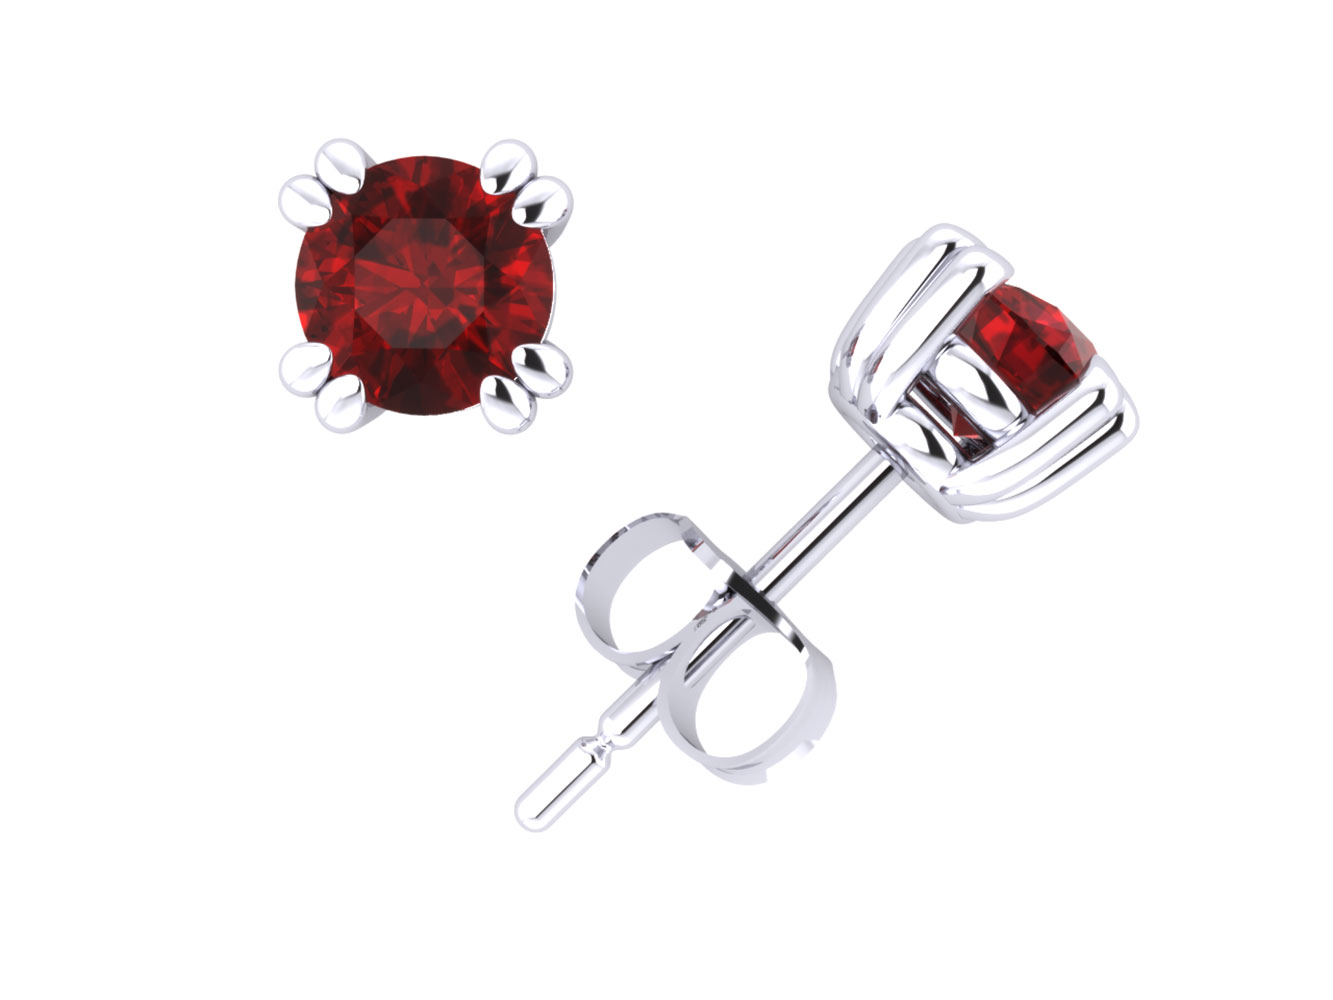 Jewel We Sell 2/5Ct Round Ruby Basket Solitaire Stud Earrings 14Kt White or Yellow Gold Double Prong AA Quality